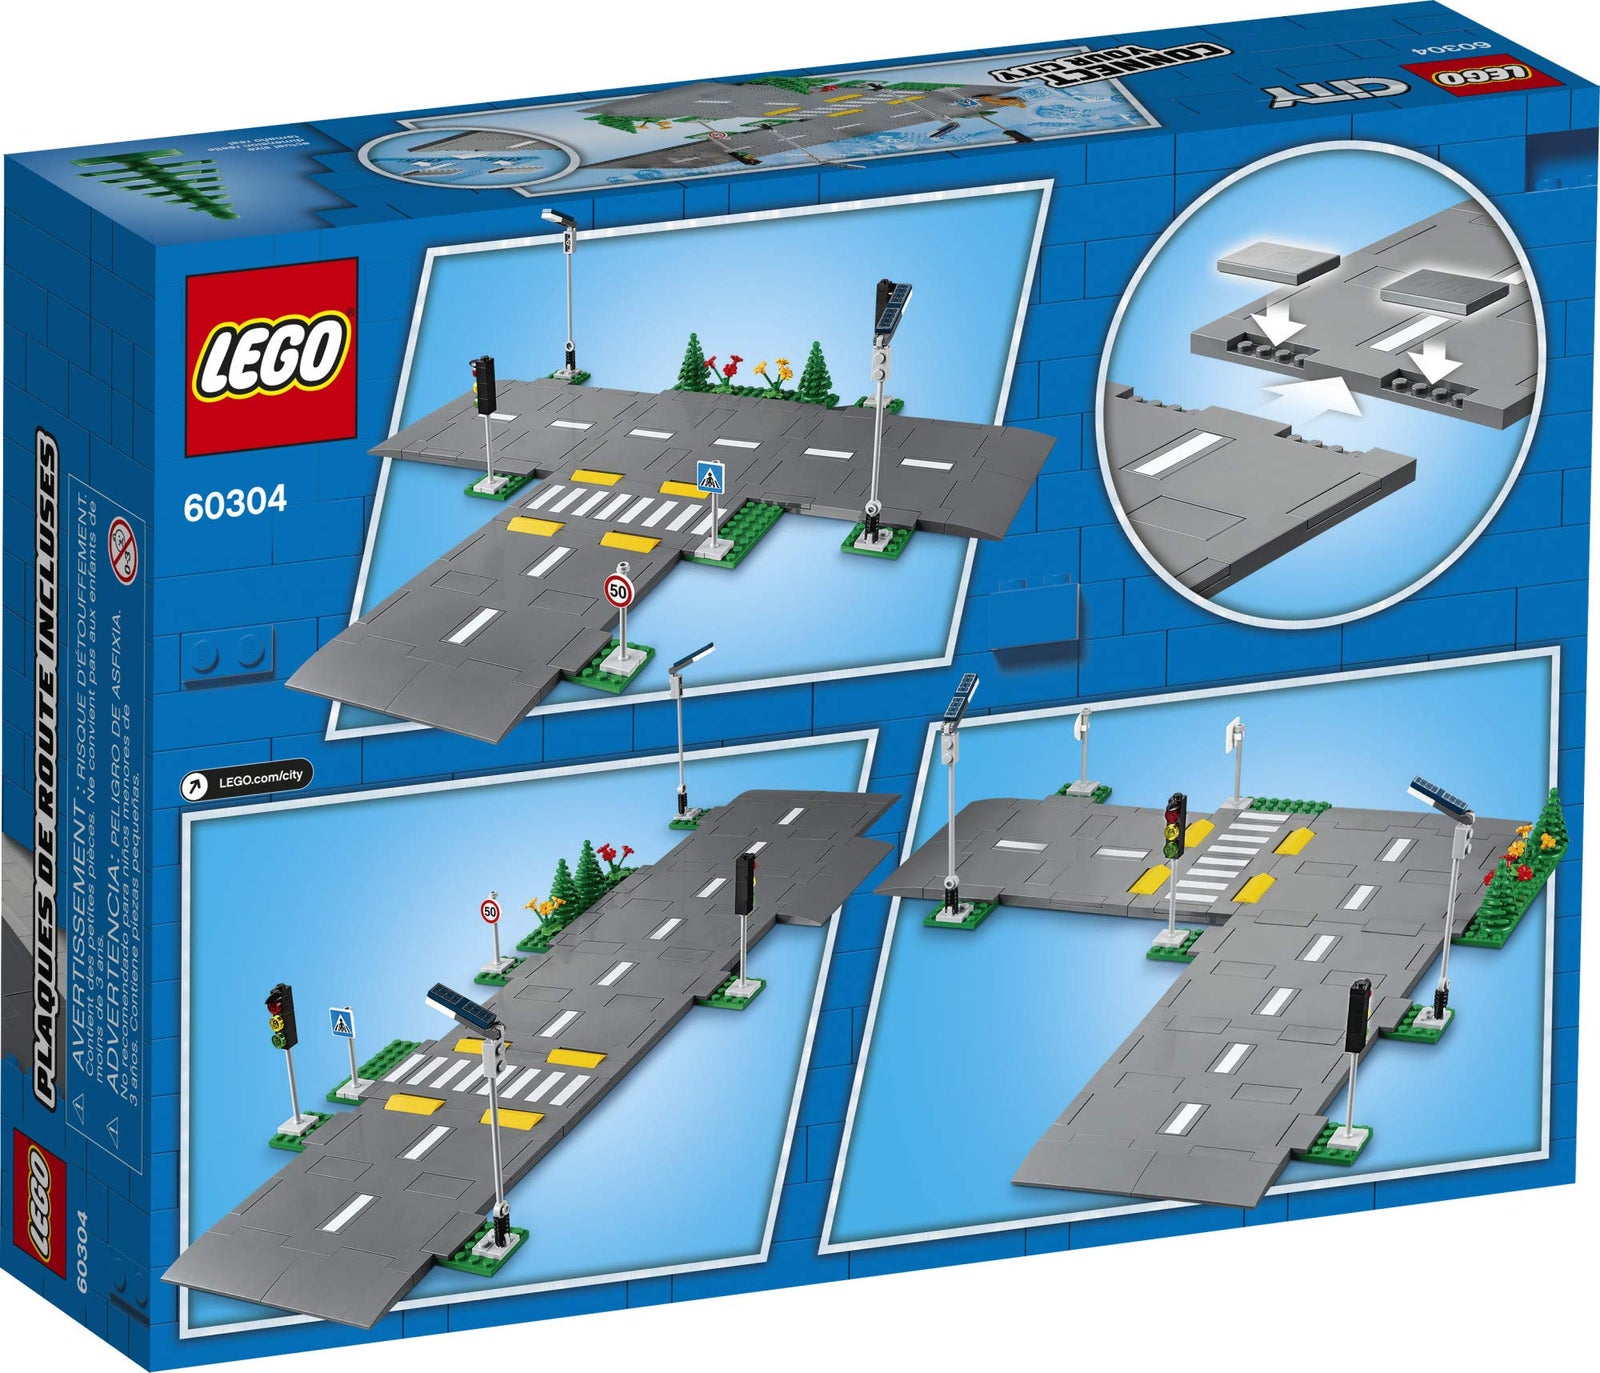 LEGO City Road Plates 60304 Building Kit; Cool Building Toy for Kids, New 2021 (112 Pieces)